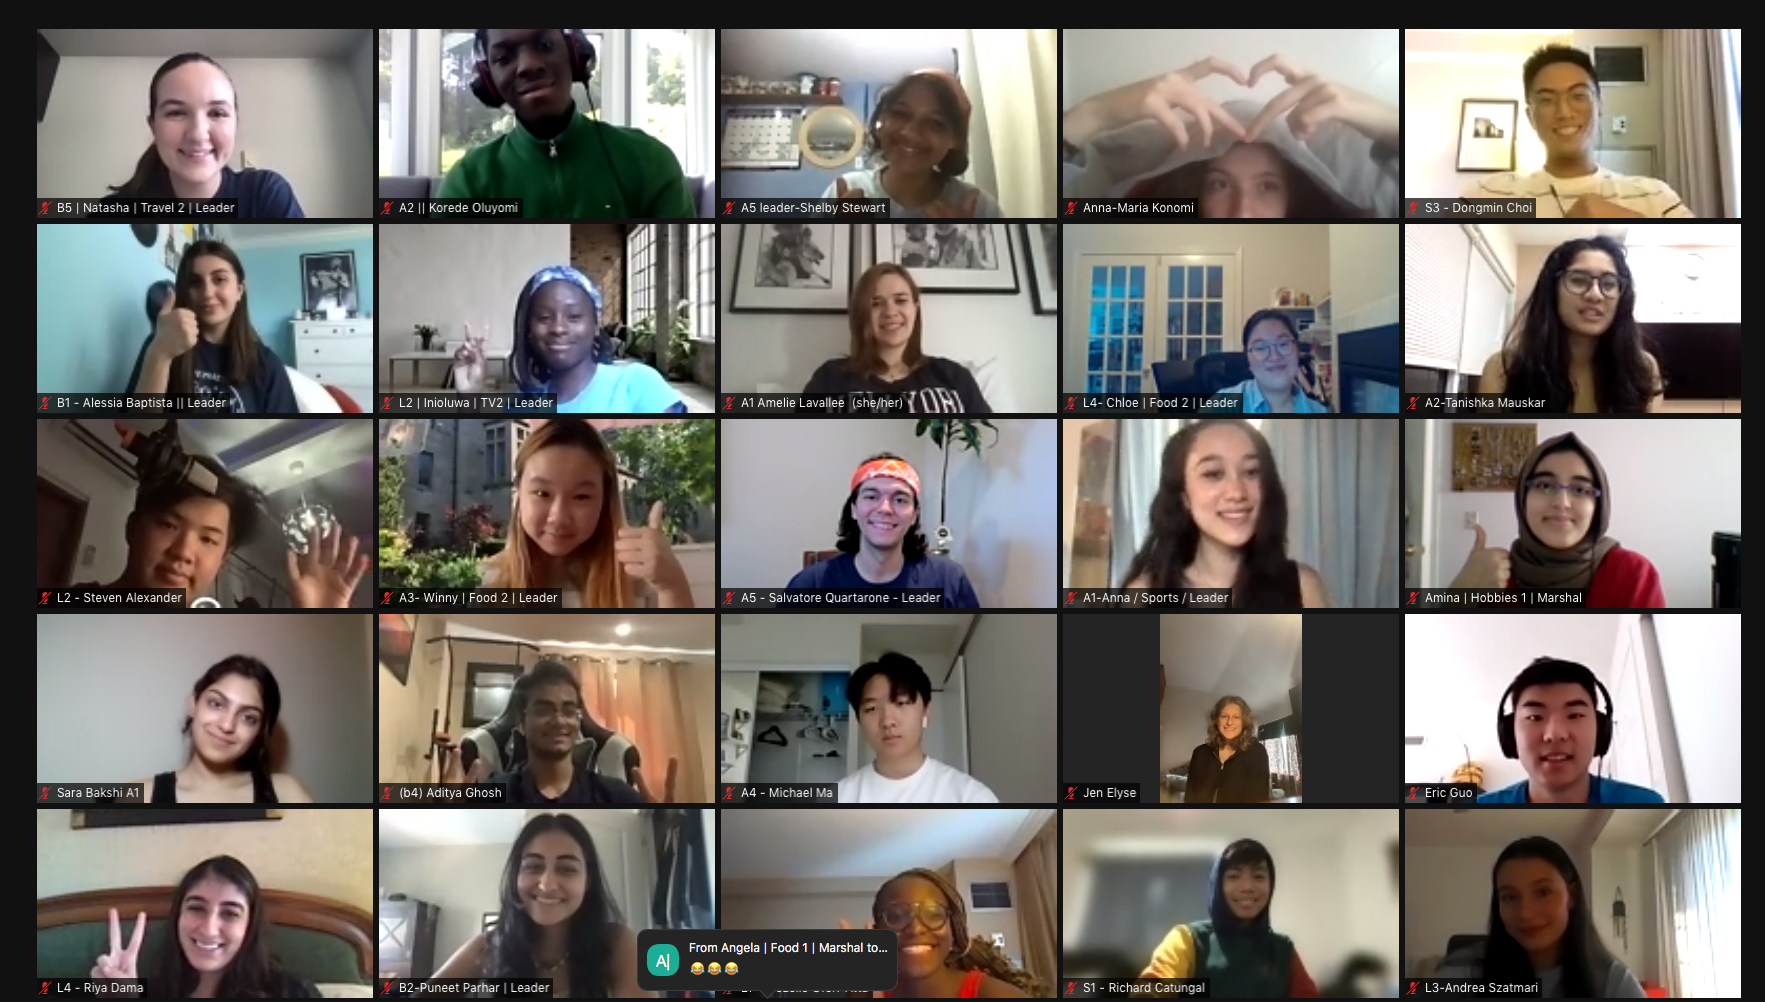 Screengrab of a Zoom meeting with 25 new St. Mike's students